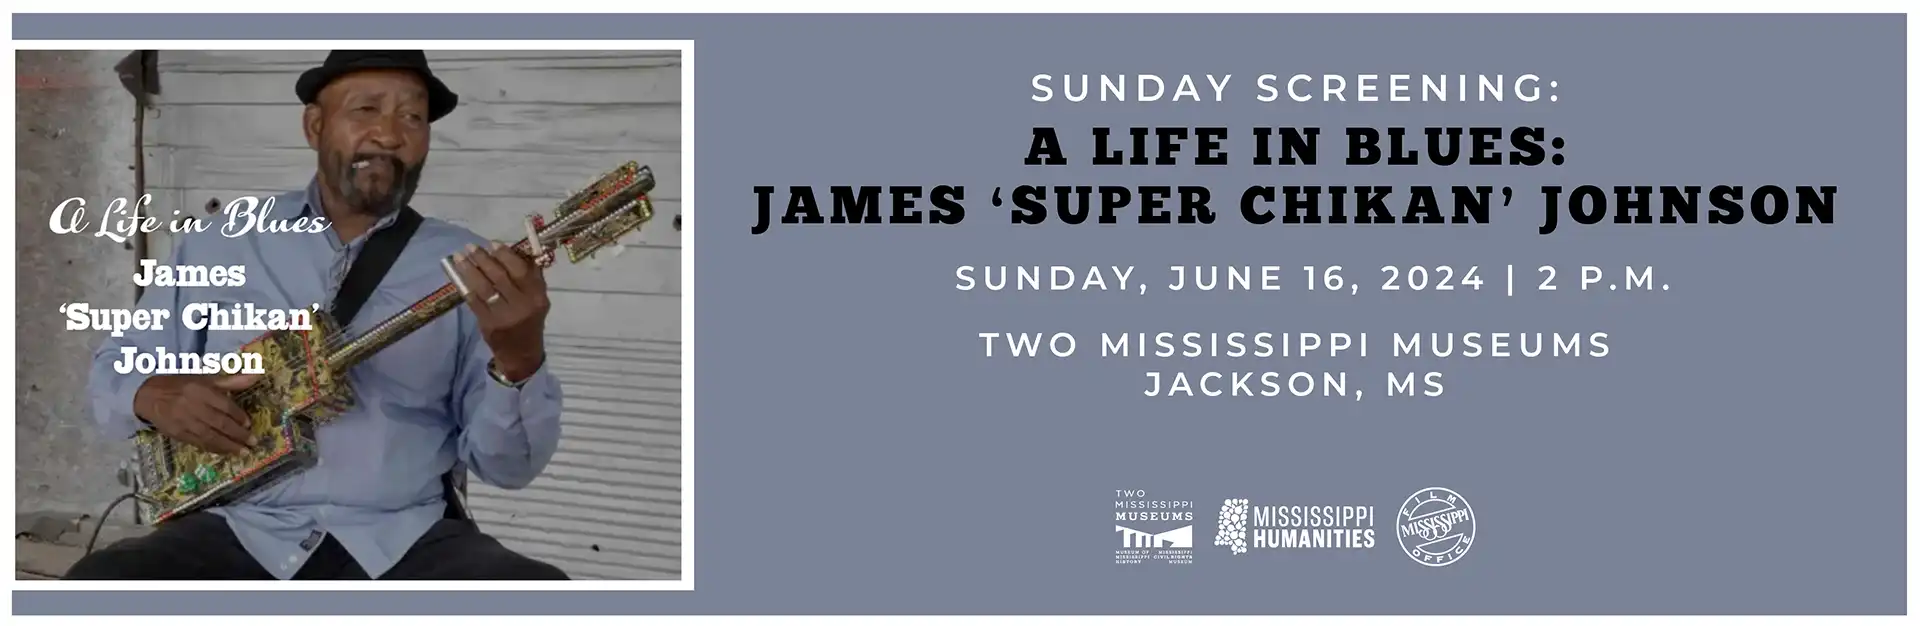 Sunday Screening - June 16, 2024 - A Life in the Blues: James 'Super Chikan' Johnson